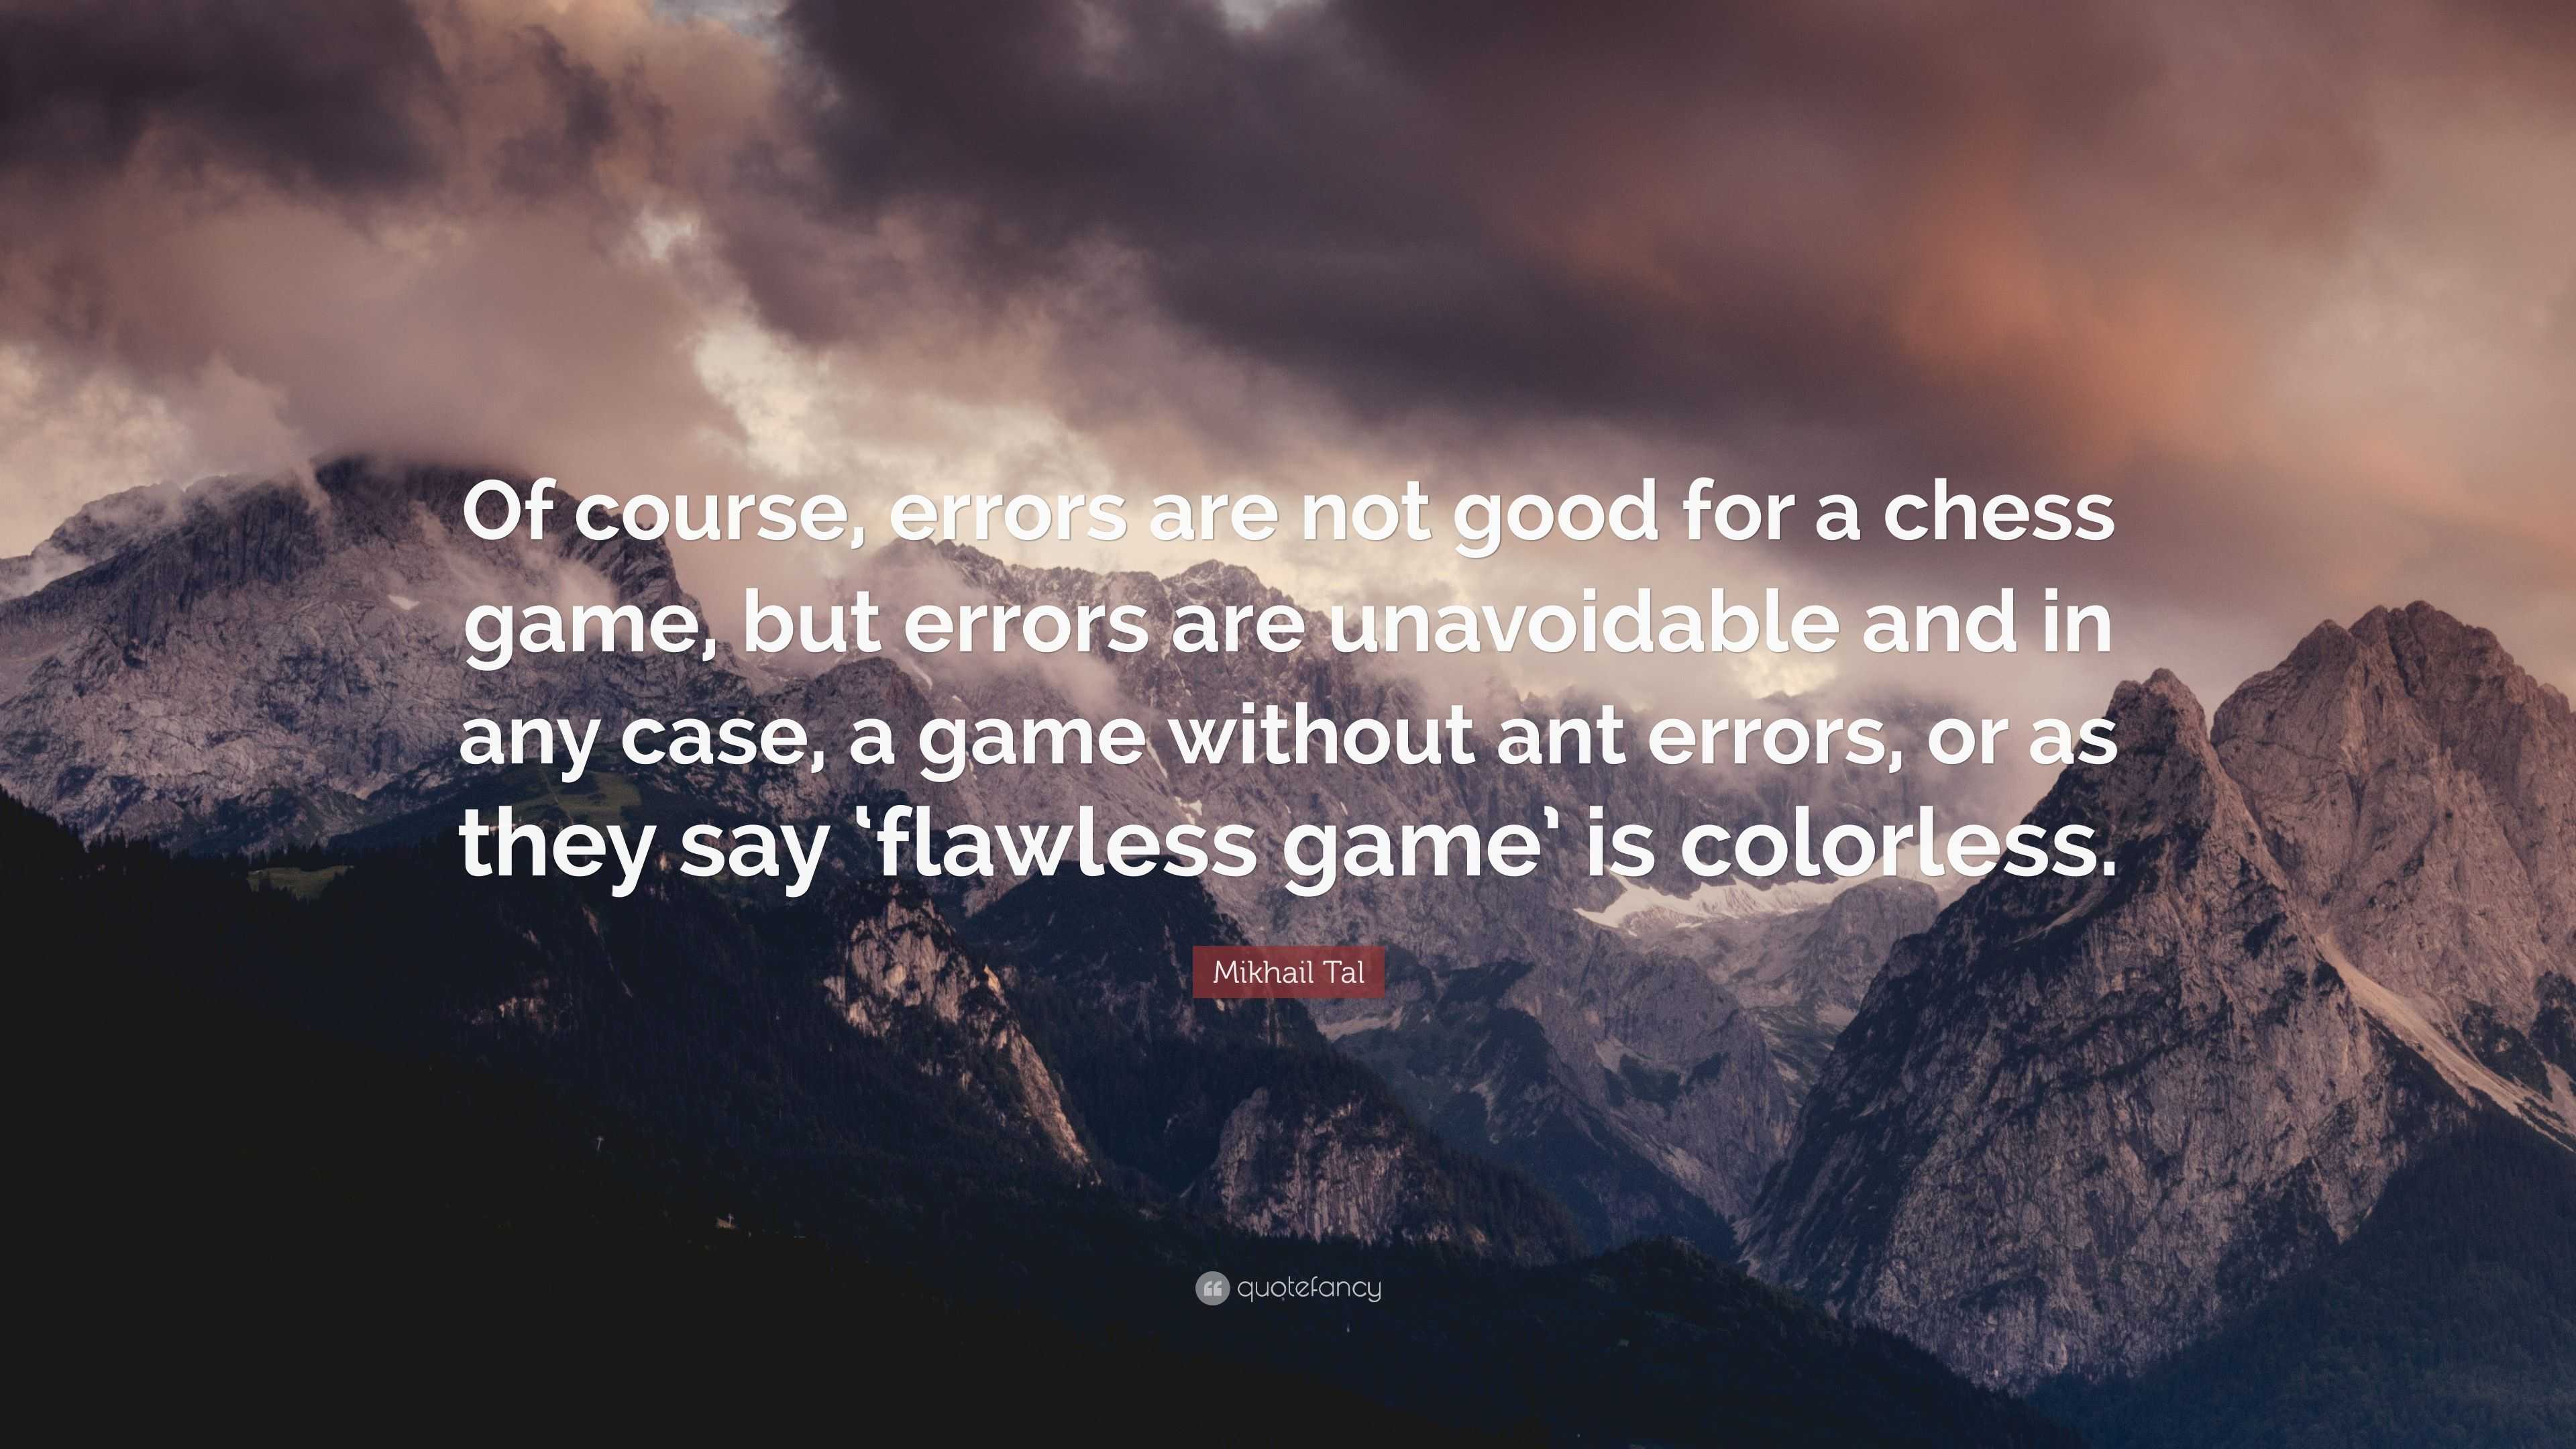 Mikhail Tal Quote: “Of course, errors are not good for a chess game, but  errors are unavoidable and in any case, a game without ant errors, ”